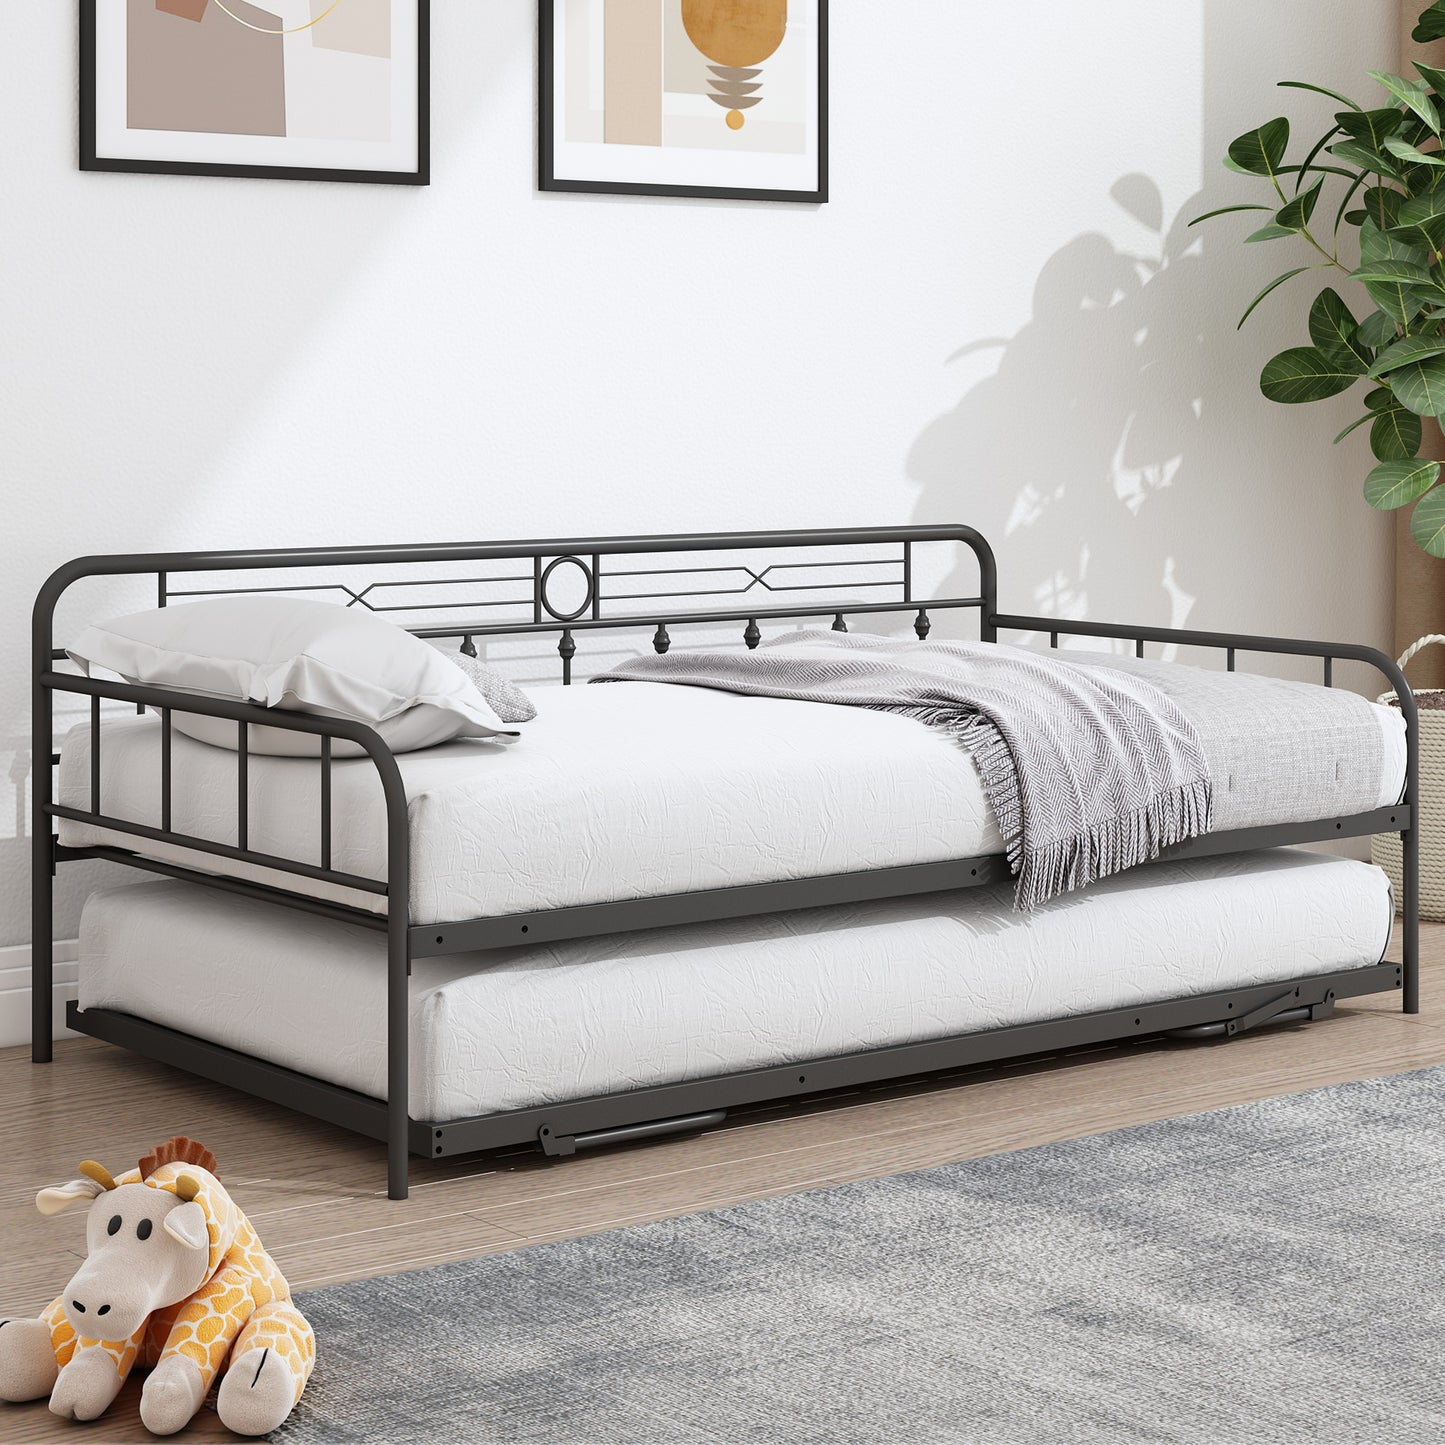 SYNGAR Twin Size Daybed with Pop Up Trundle for Kids Adults, Modern Metal Sofa Bed Platform Bed with Adjustable Trundle Can be Risen as High as Bed, Strong Steel Slat Support, Black